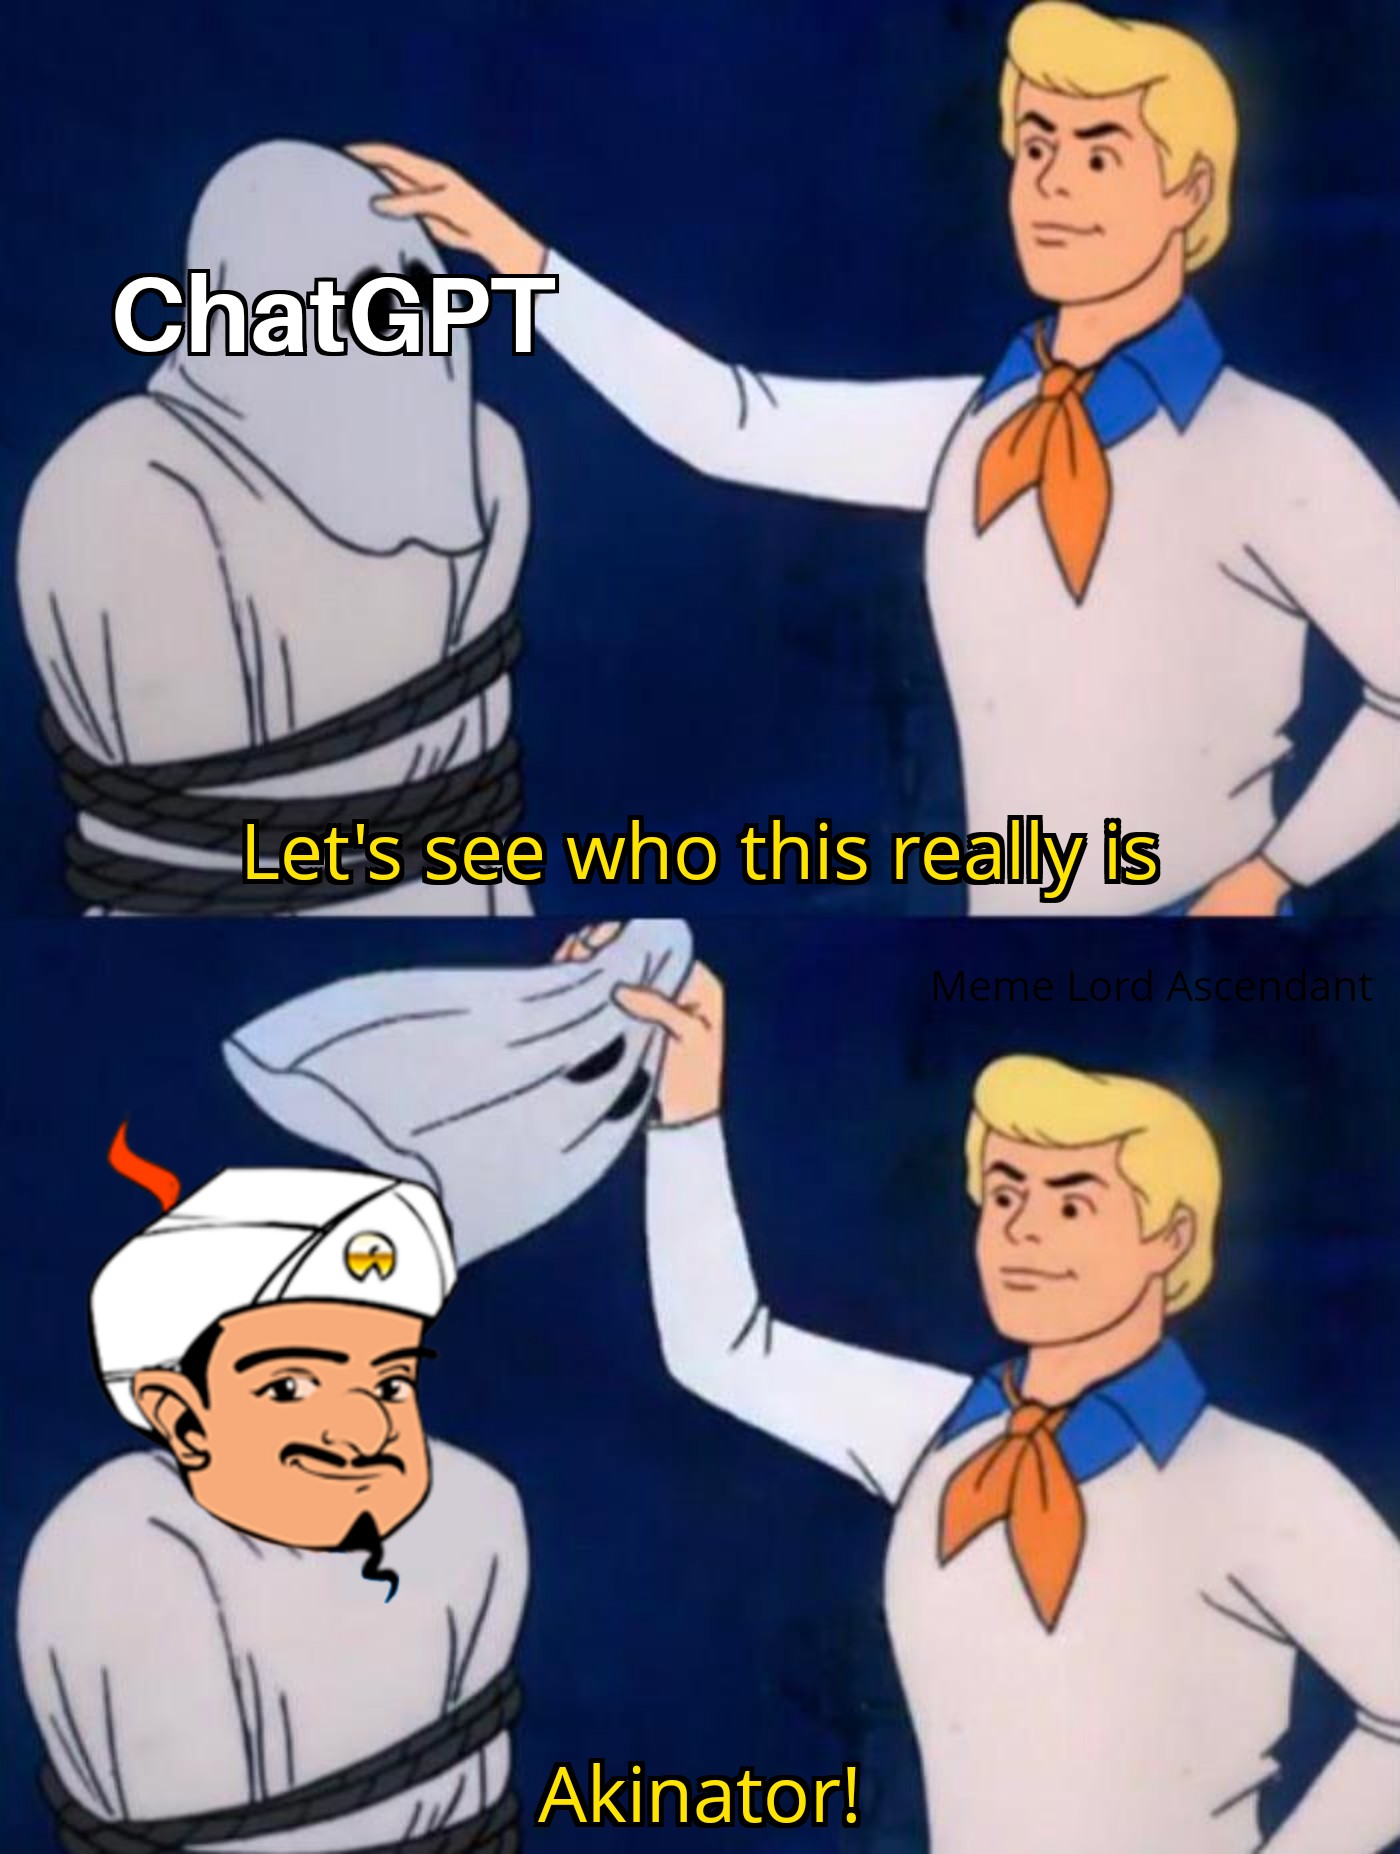 dank memes - Meme - ChatGPT Let's see who this really is Akinator! Meme Lord Ascendant 16